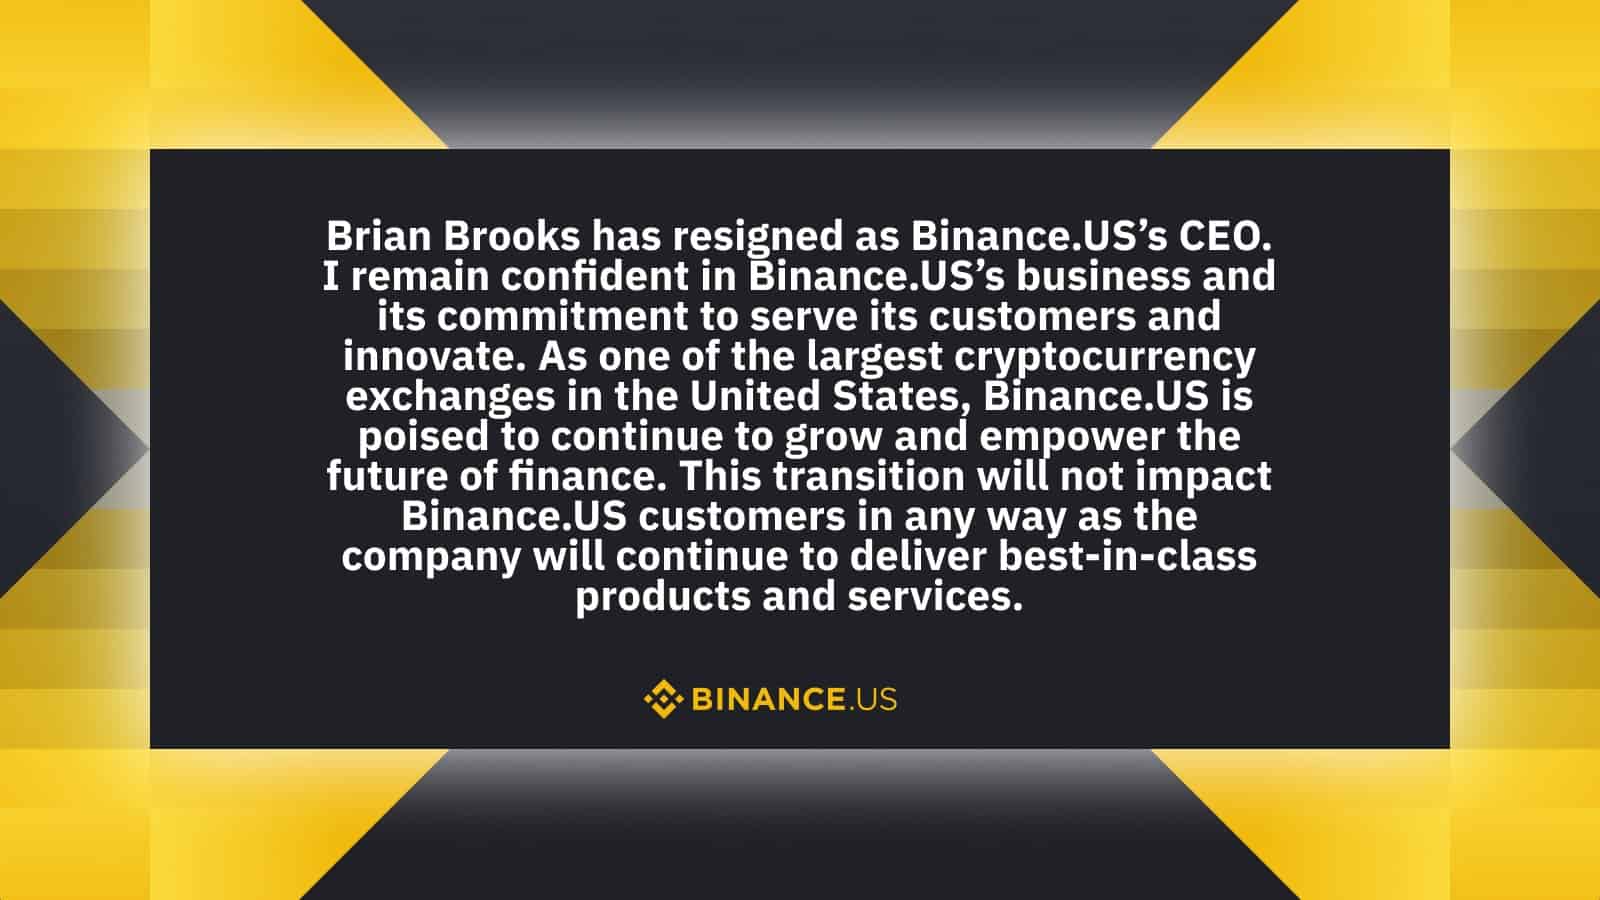 Brian Brooks Leaves Binance US, Citing ‘Differences’ With ...